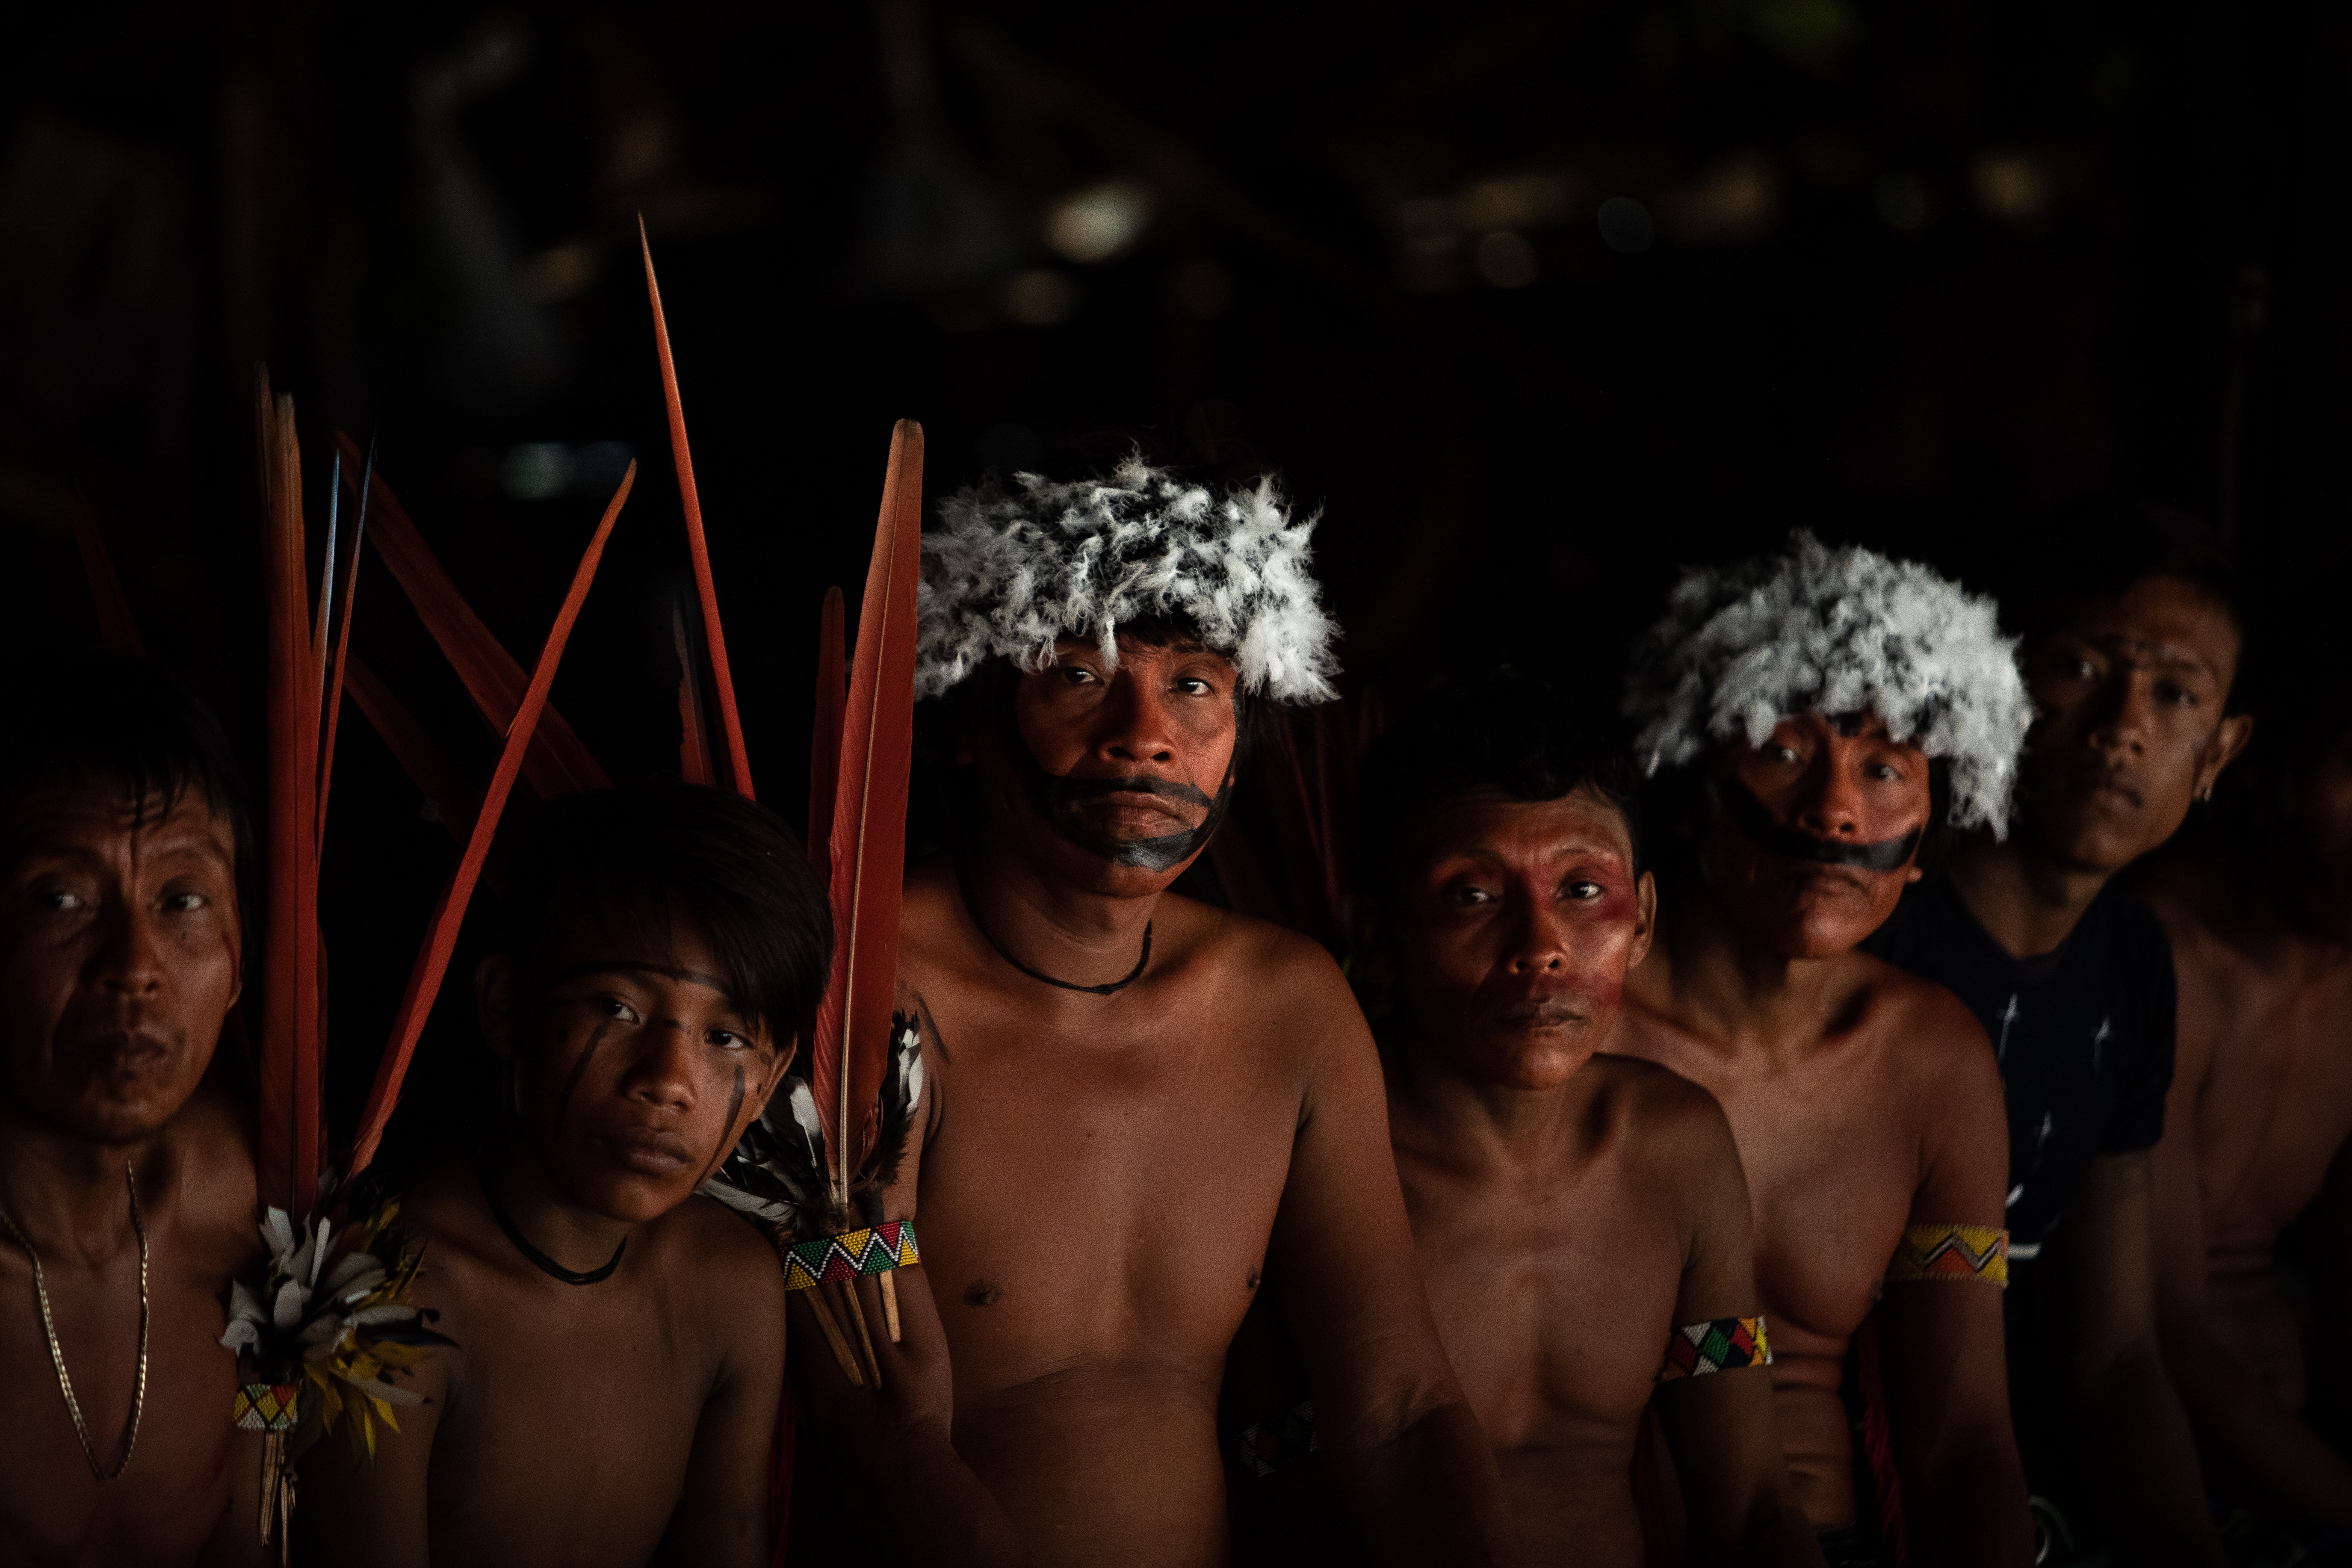 ‘We, the Yanomami, do not want to die’